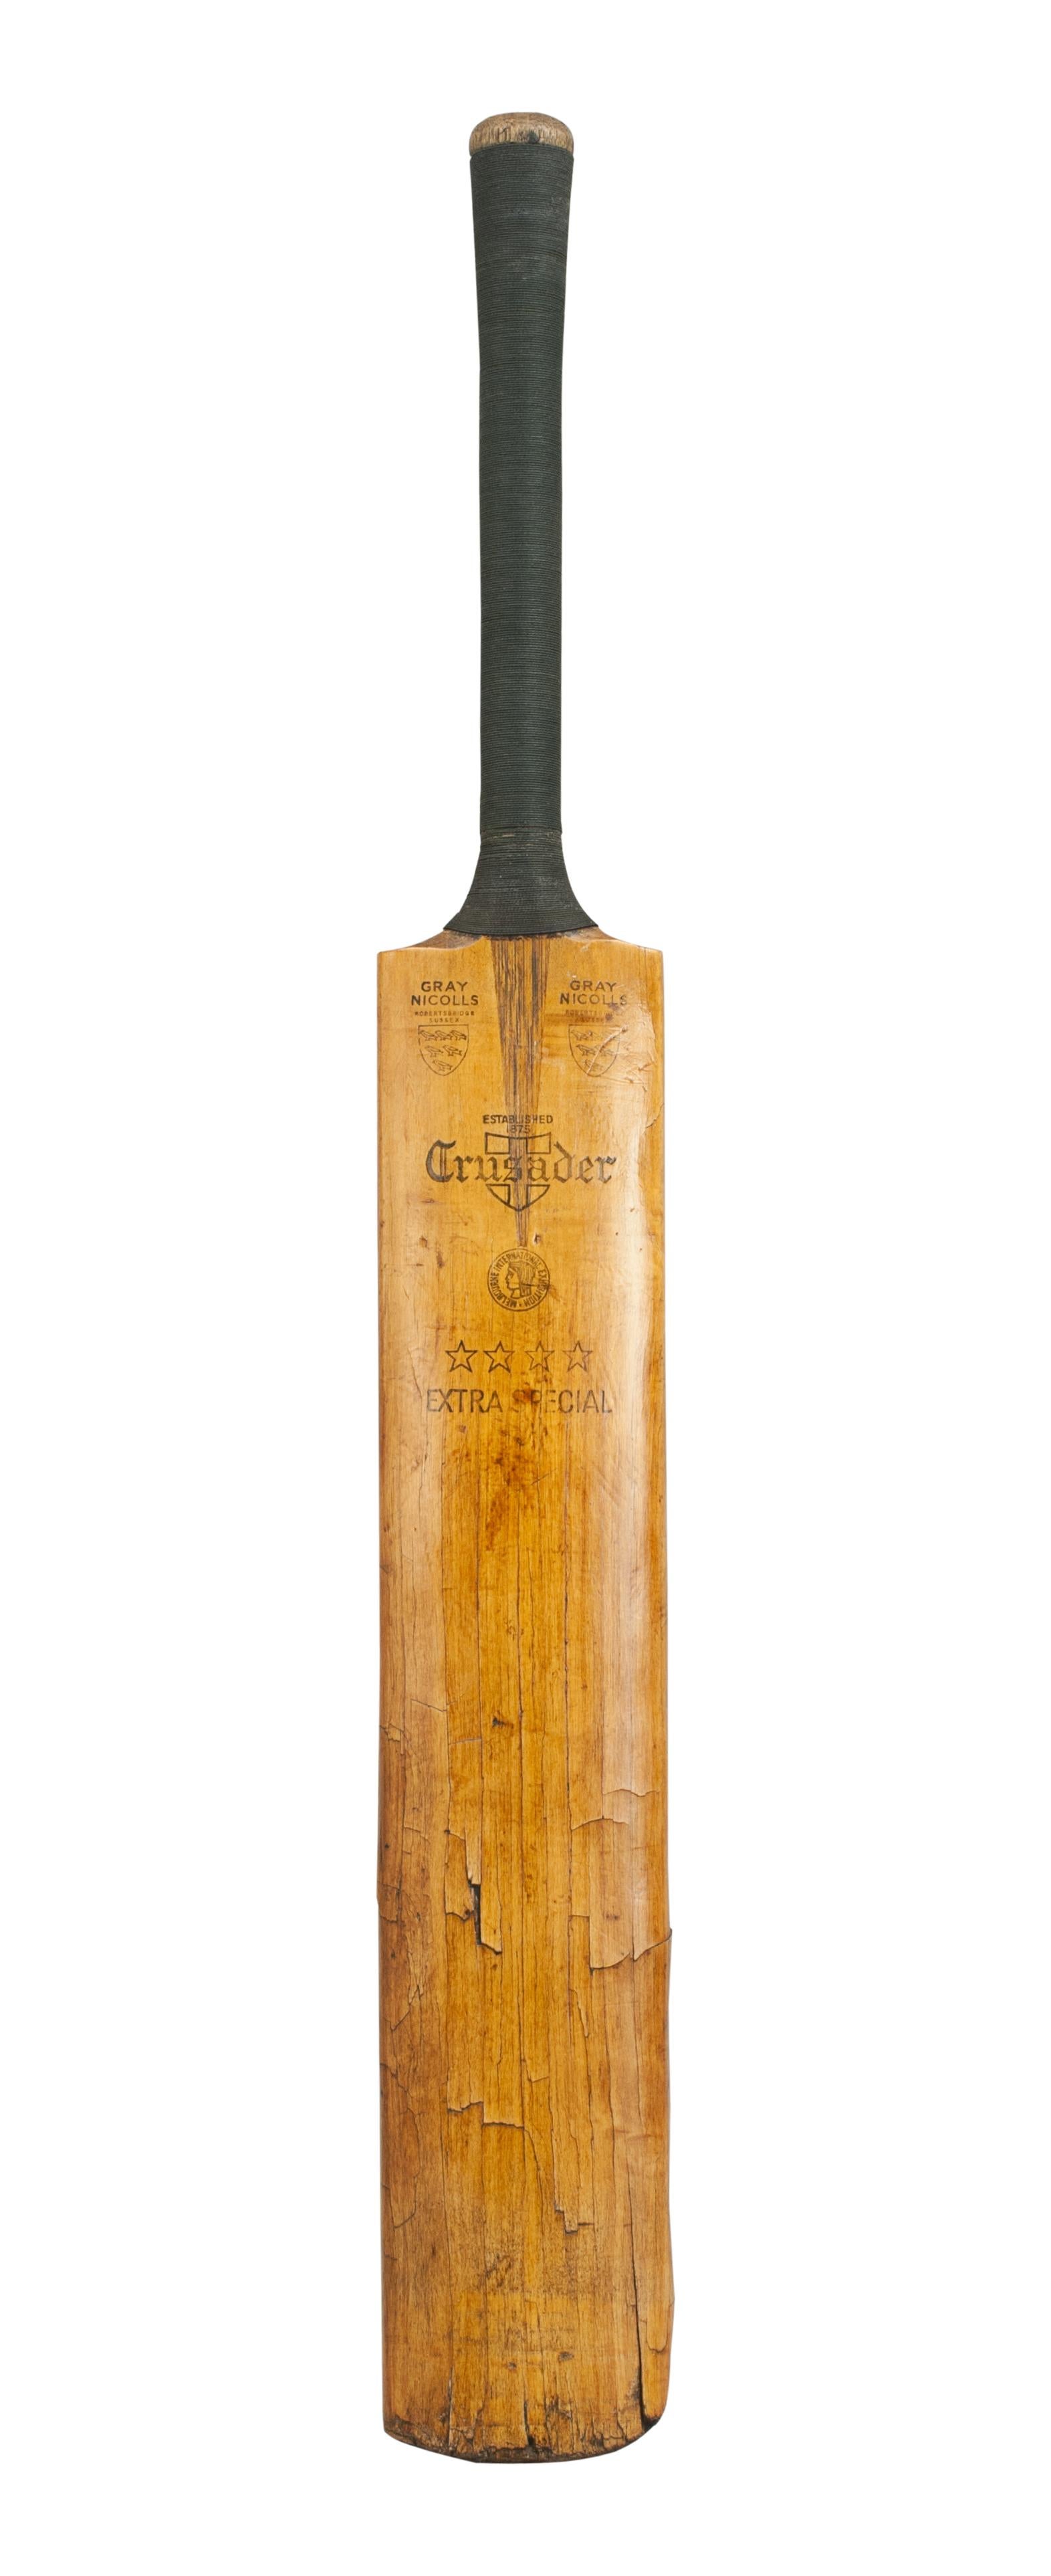 A fine gray Nicolls cricket bat 'Crusader'. The bat is in good condition with new cord grip. The shoulders are embossed 'Gray Nicolls' with the Nicolls trade mark shield with the words 'Robertsbridge Sussex'. Also embossed on the blade of the bat is